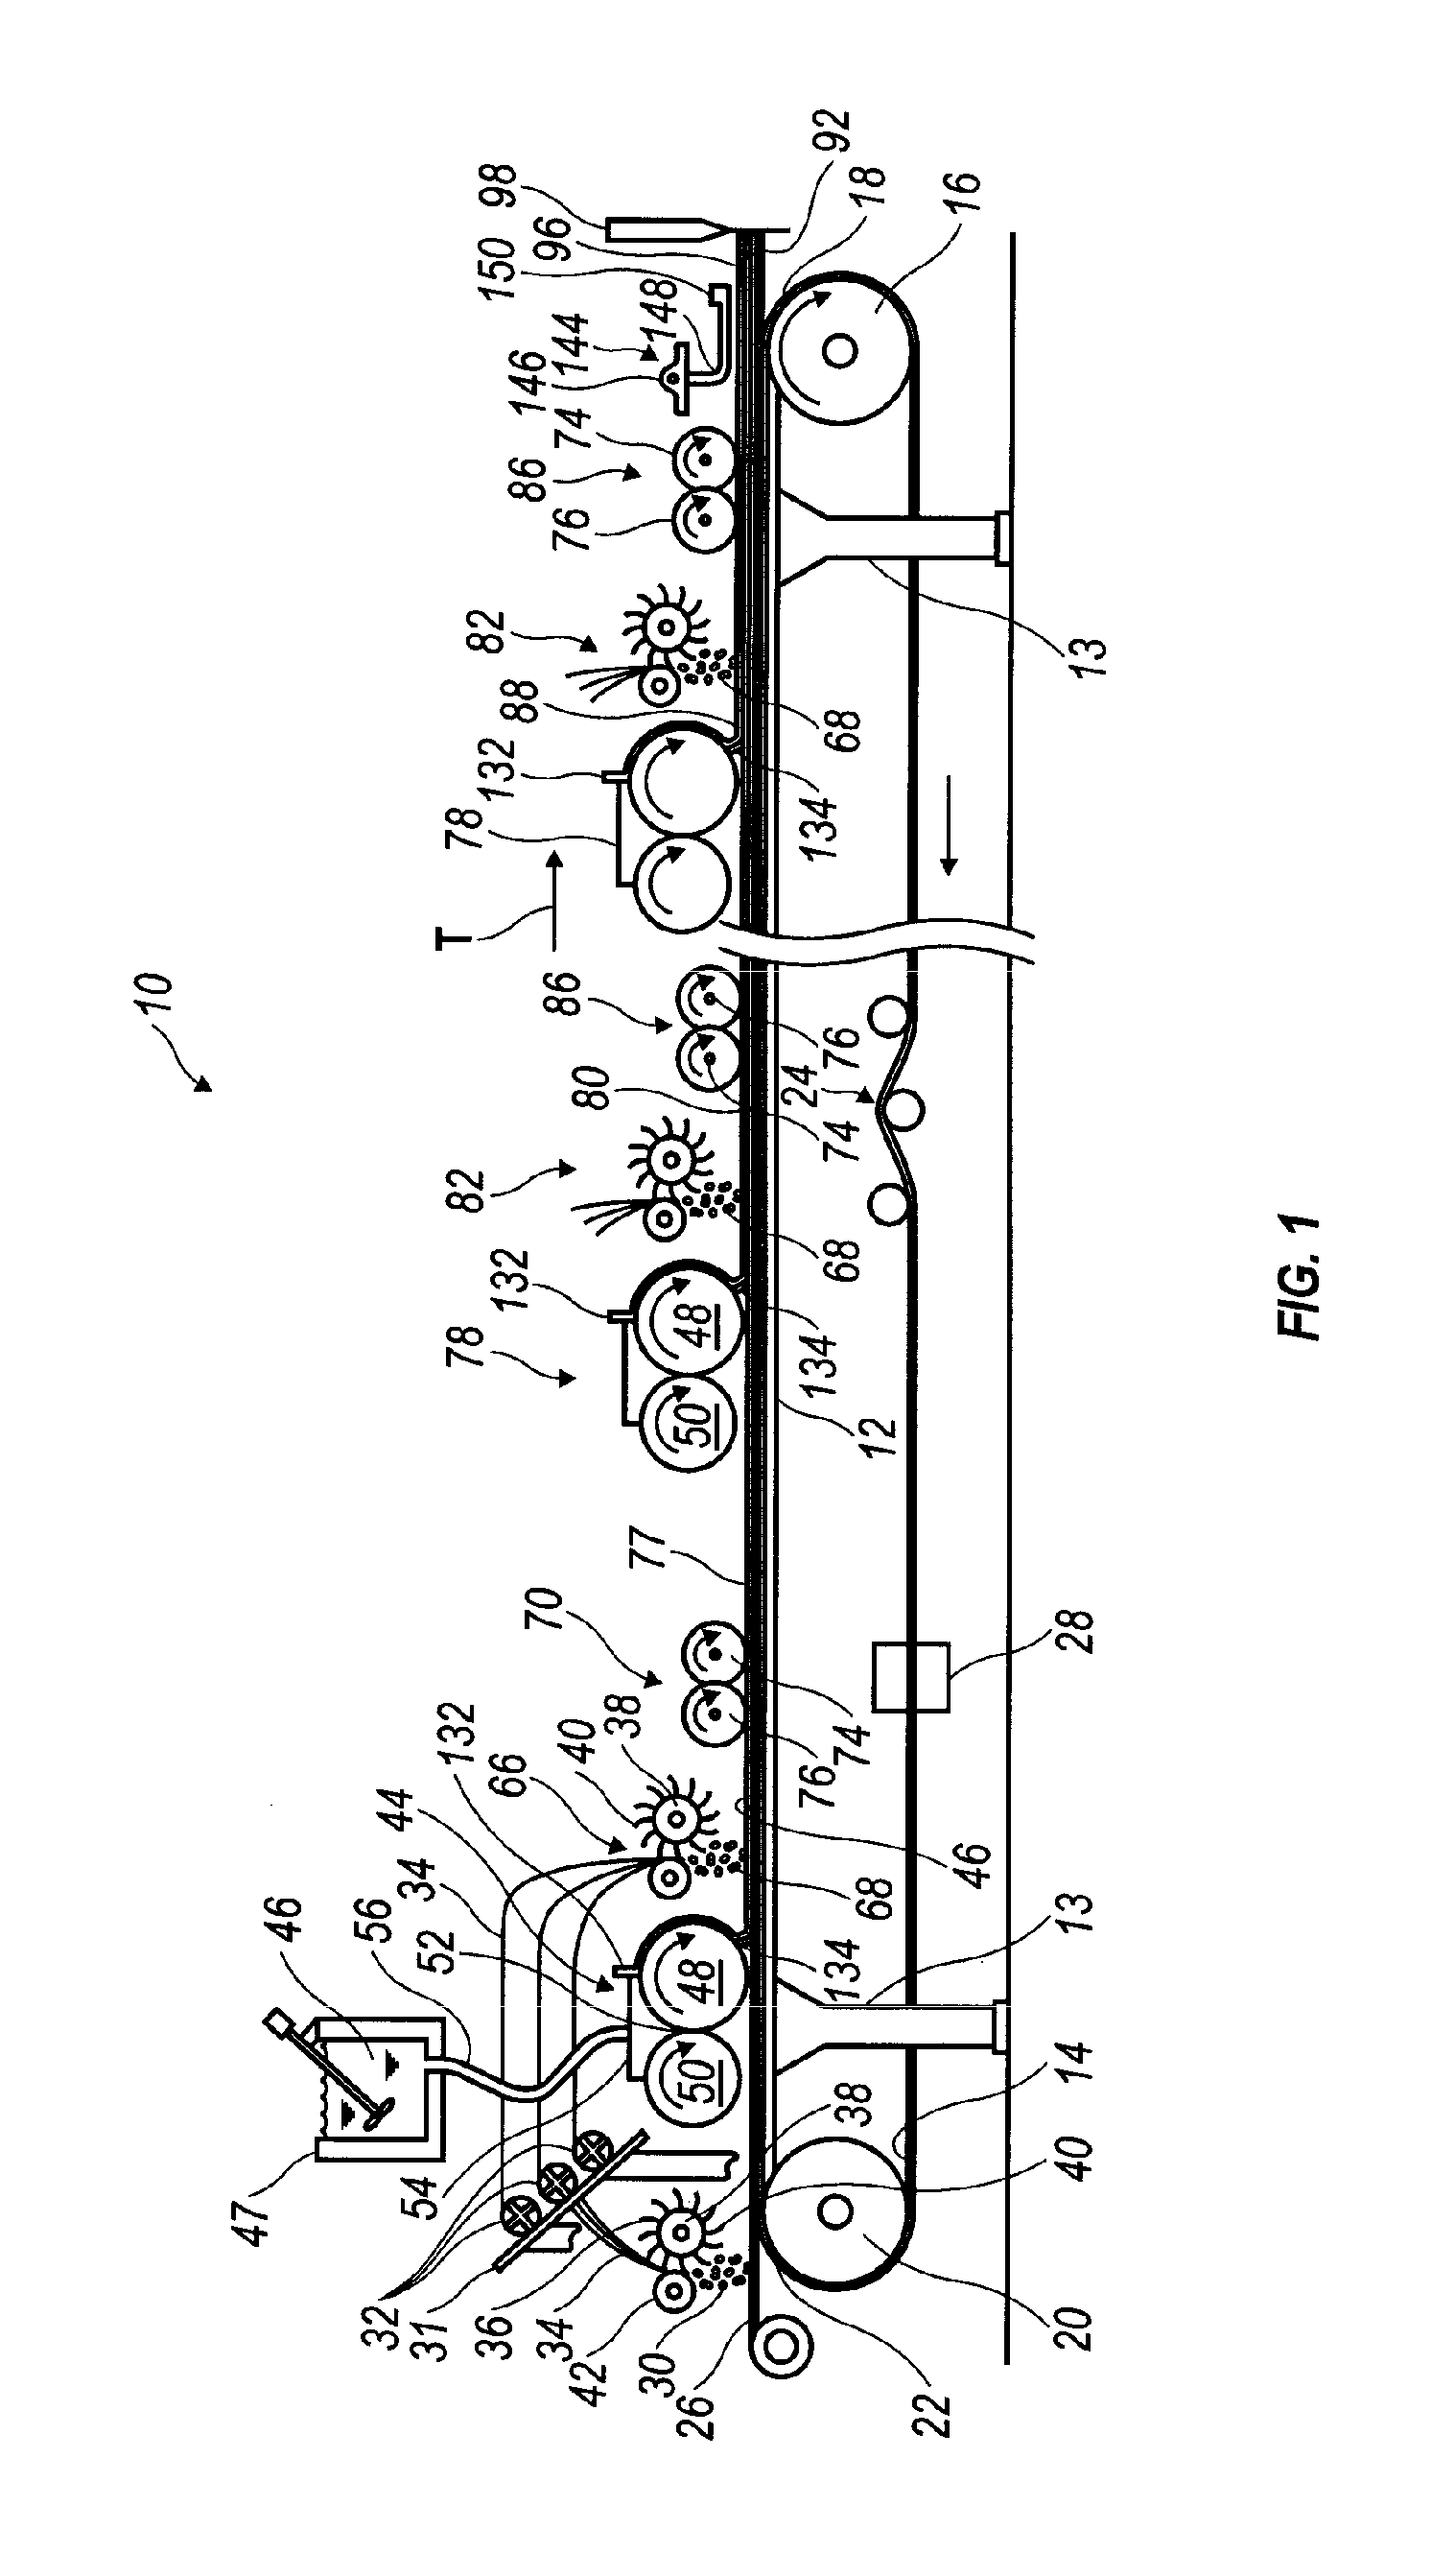 Method for wet mixing cementitious slurry for fiber-reinforced structural cement panels